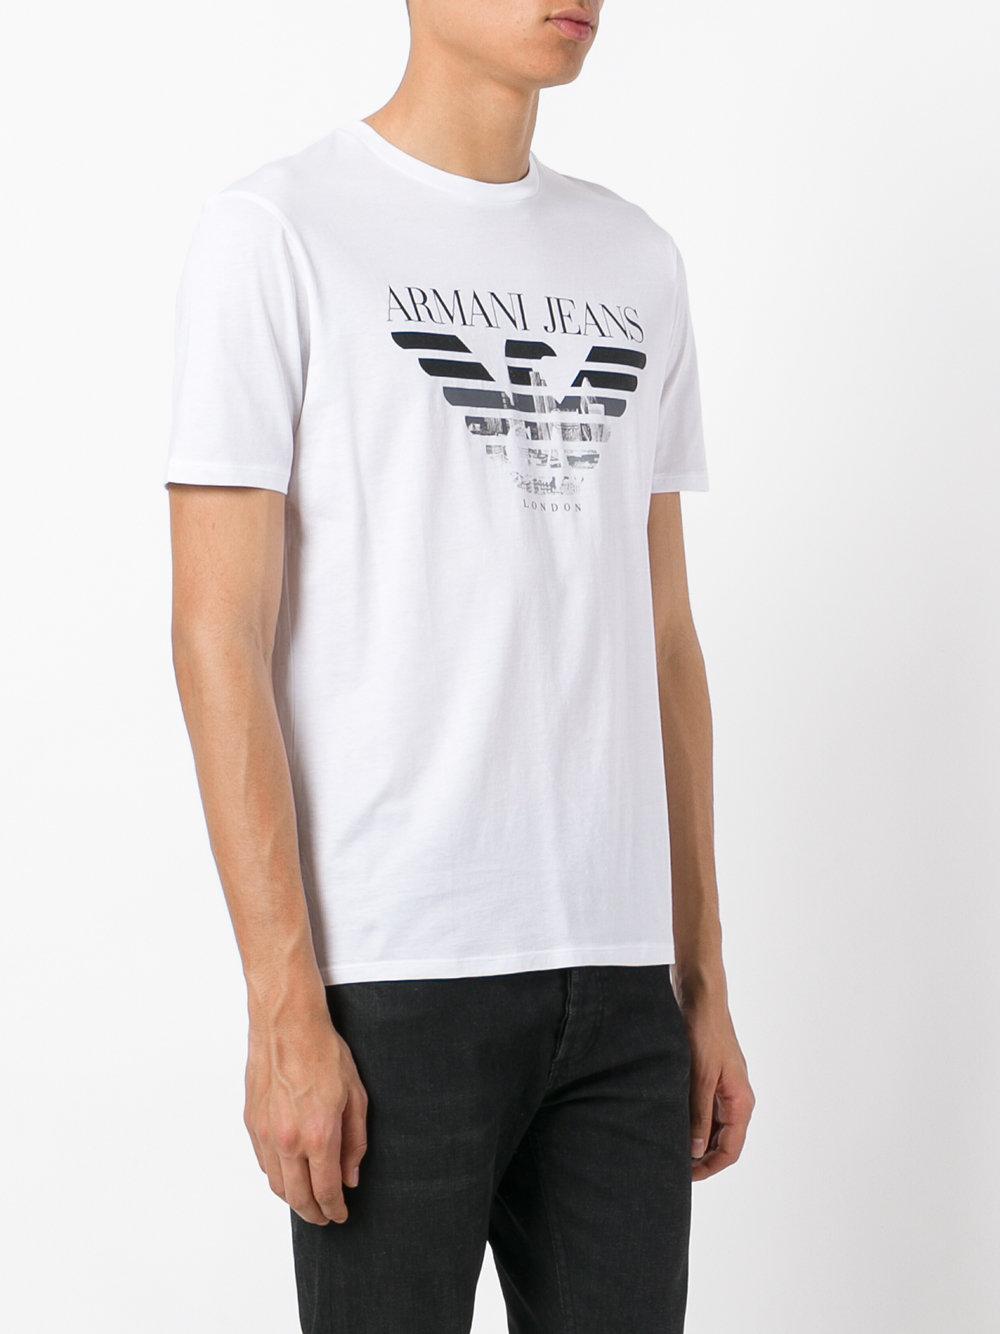 Lyst - Armani Jeans White T-shirt in White for Men